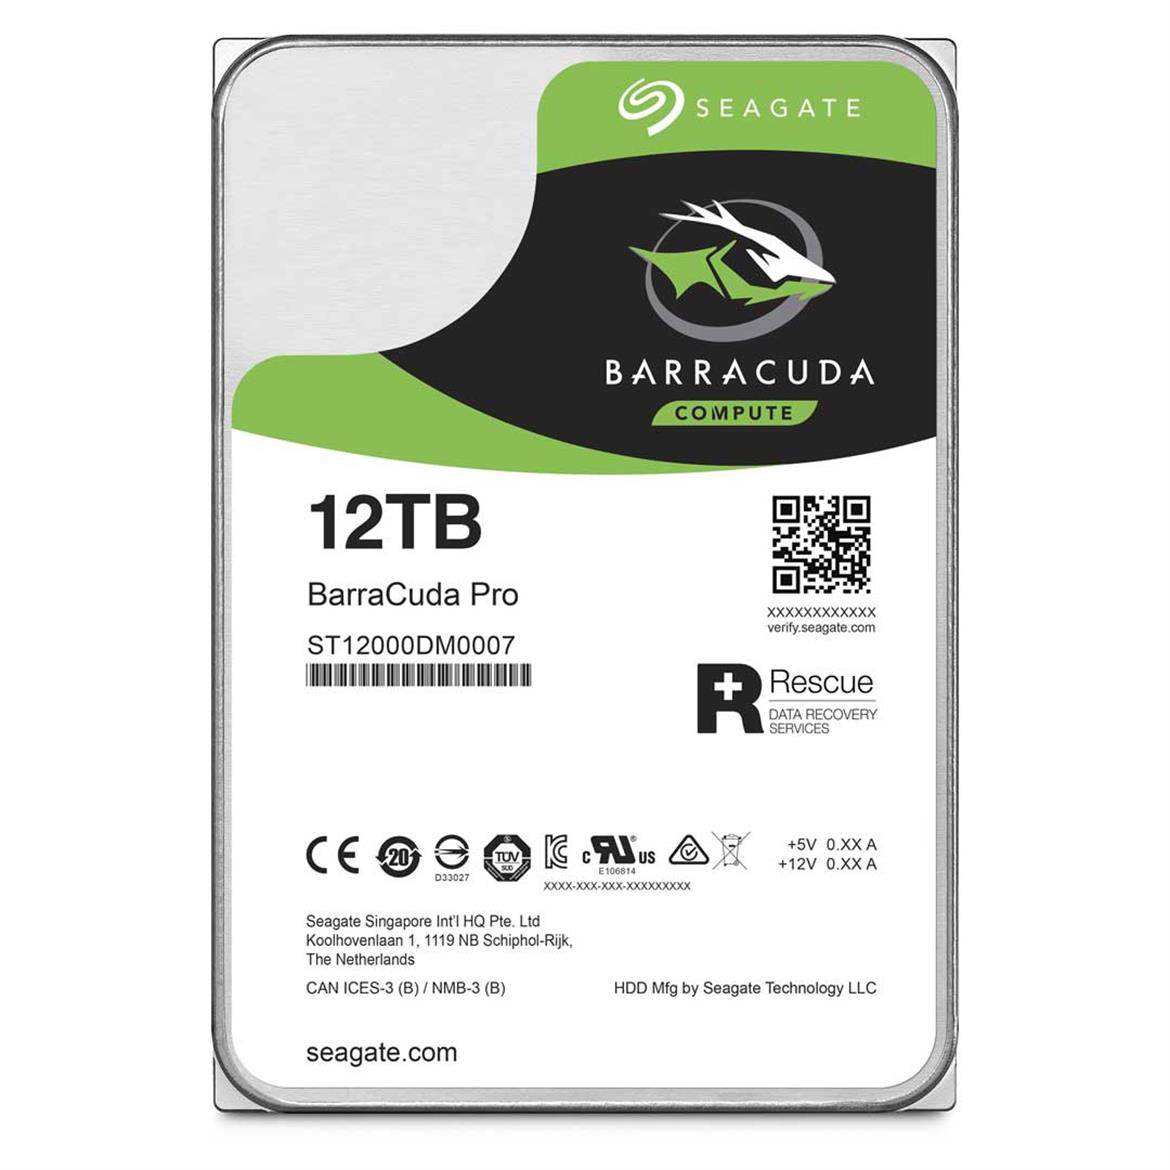 Seagate Launches 12TB IronWolf NAS And 12TB Barracuda Pro Hard Drives